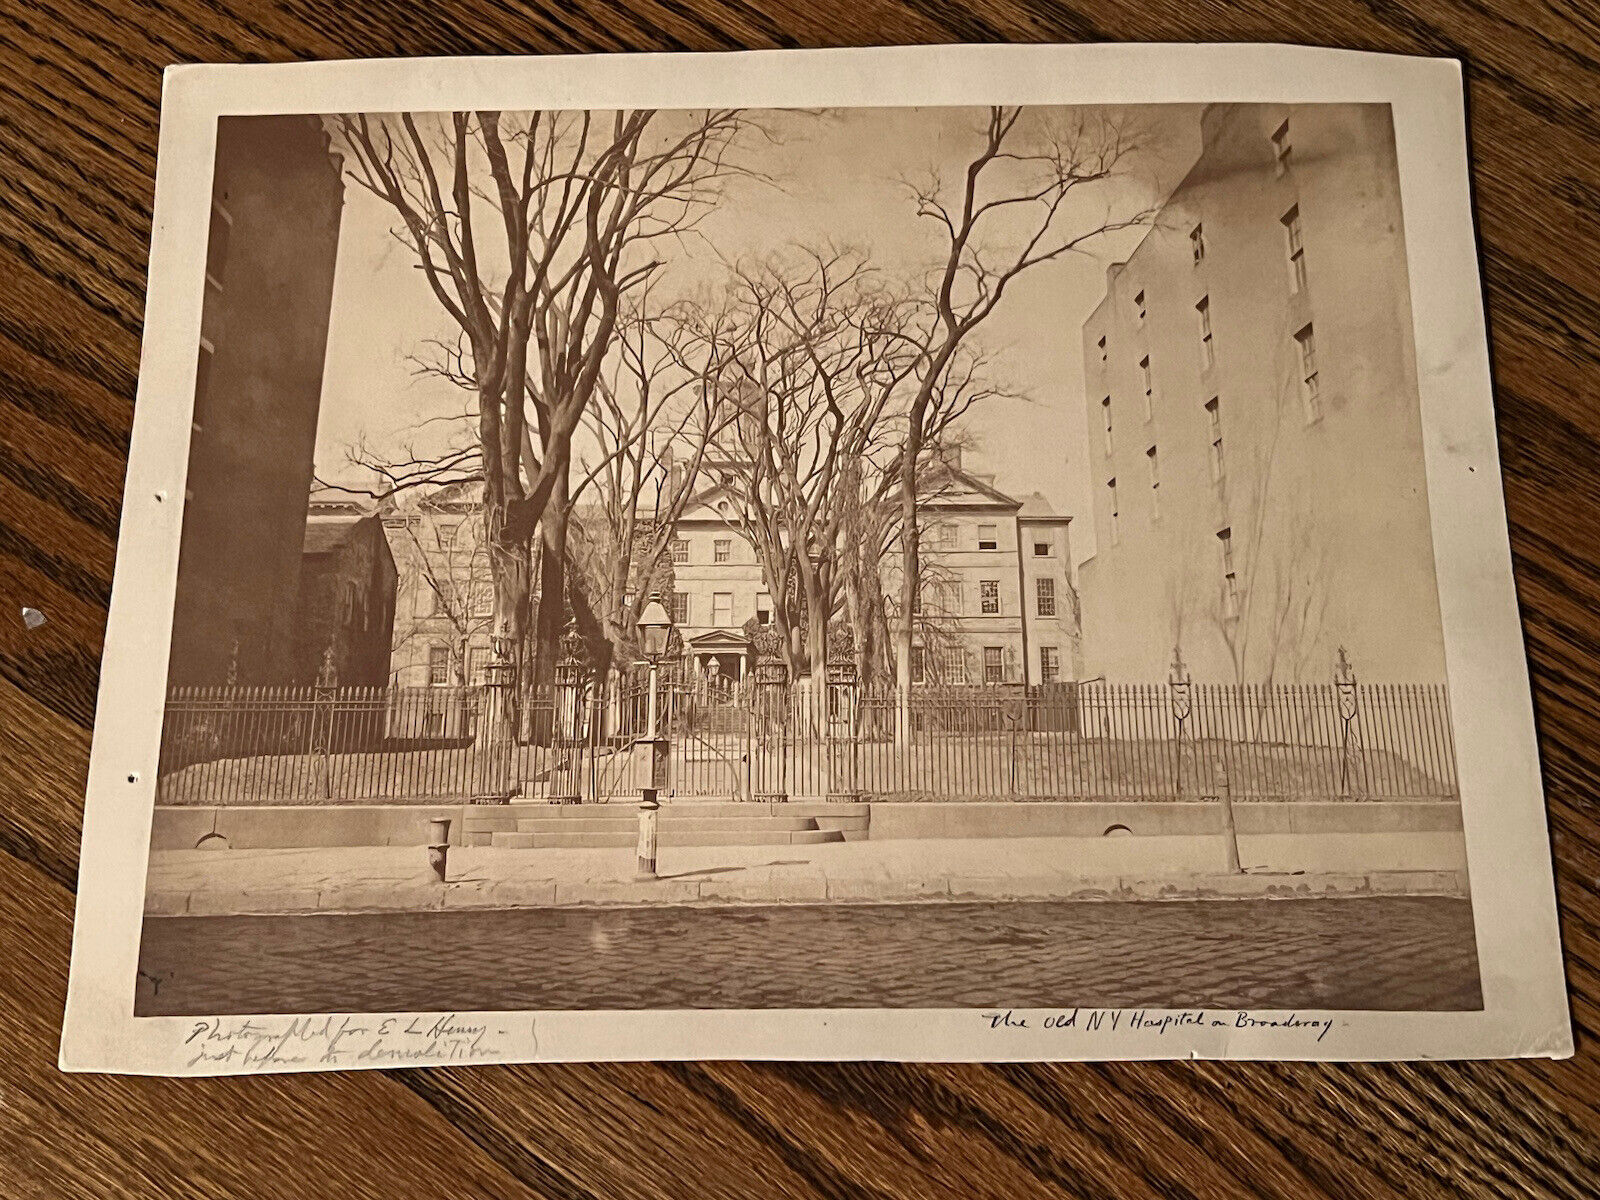 OLD NEW YORK HOSPITAL ALBUMIN PHOTOGRAPH  TAKEN BEFORE ITS DEMOLITION .